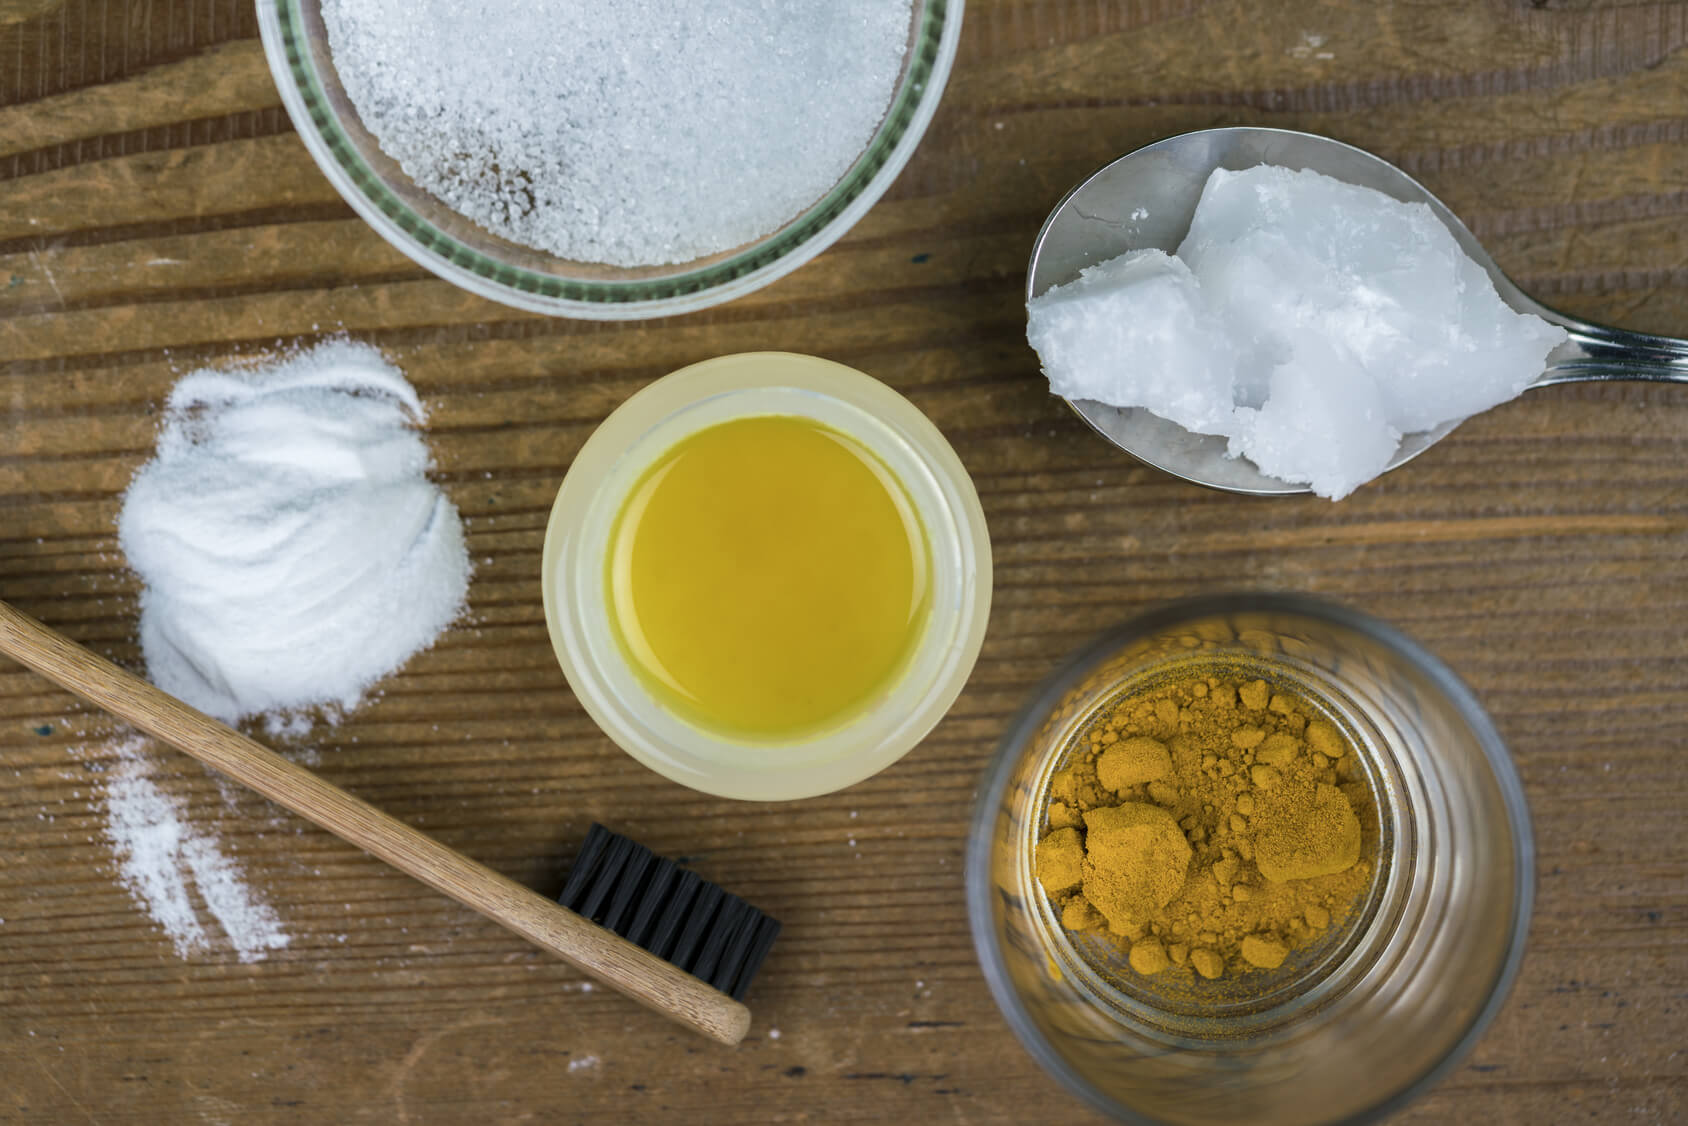 Homemade toothpaste with all-natural ingredients is better for long-term health.